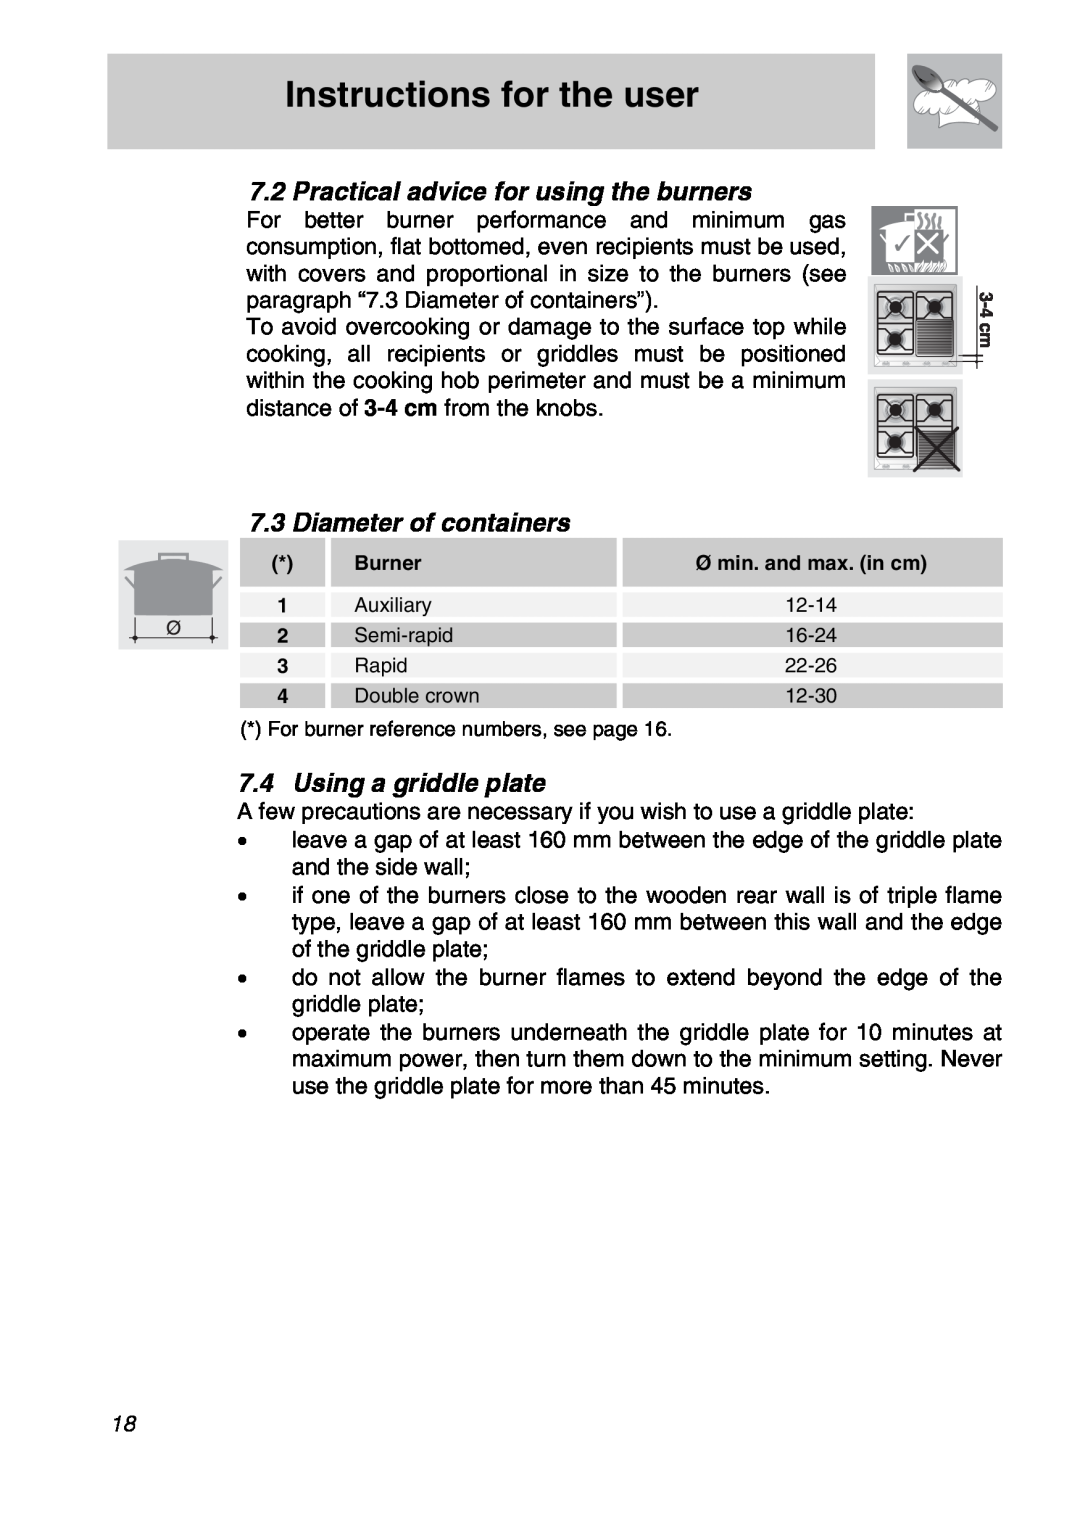 Smeg CIR597X Instructions for the user, Practical advice for using the burners, Diameter of containers, 1 2 3 4, Burner 